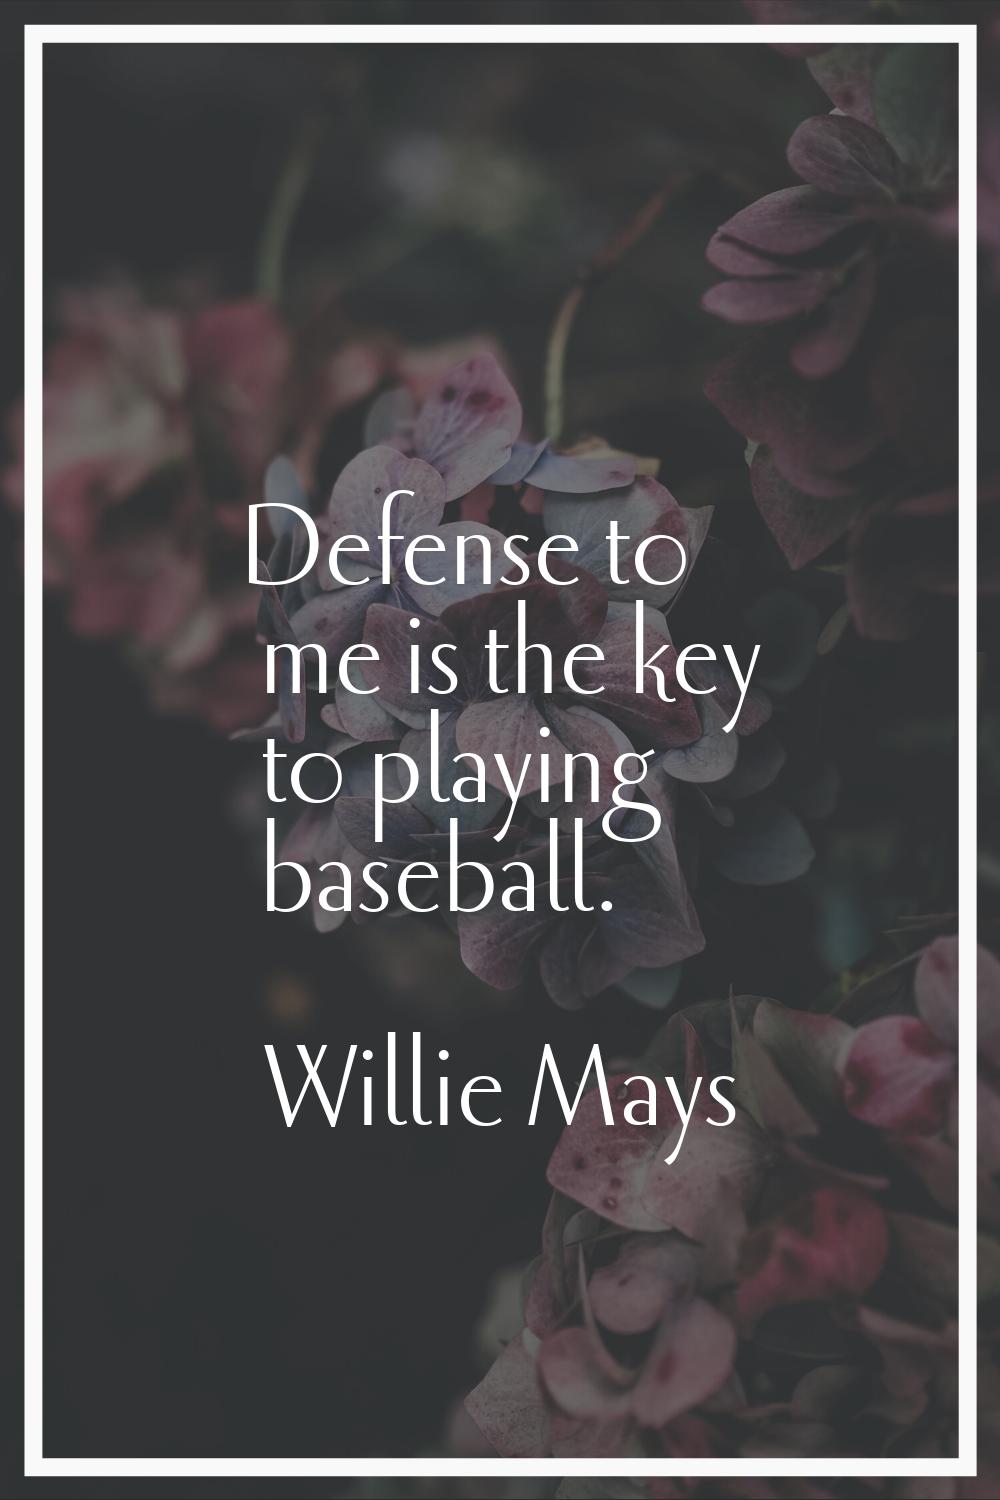 Defense to me is the key to playing baseball.